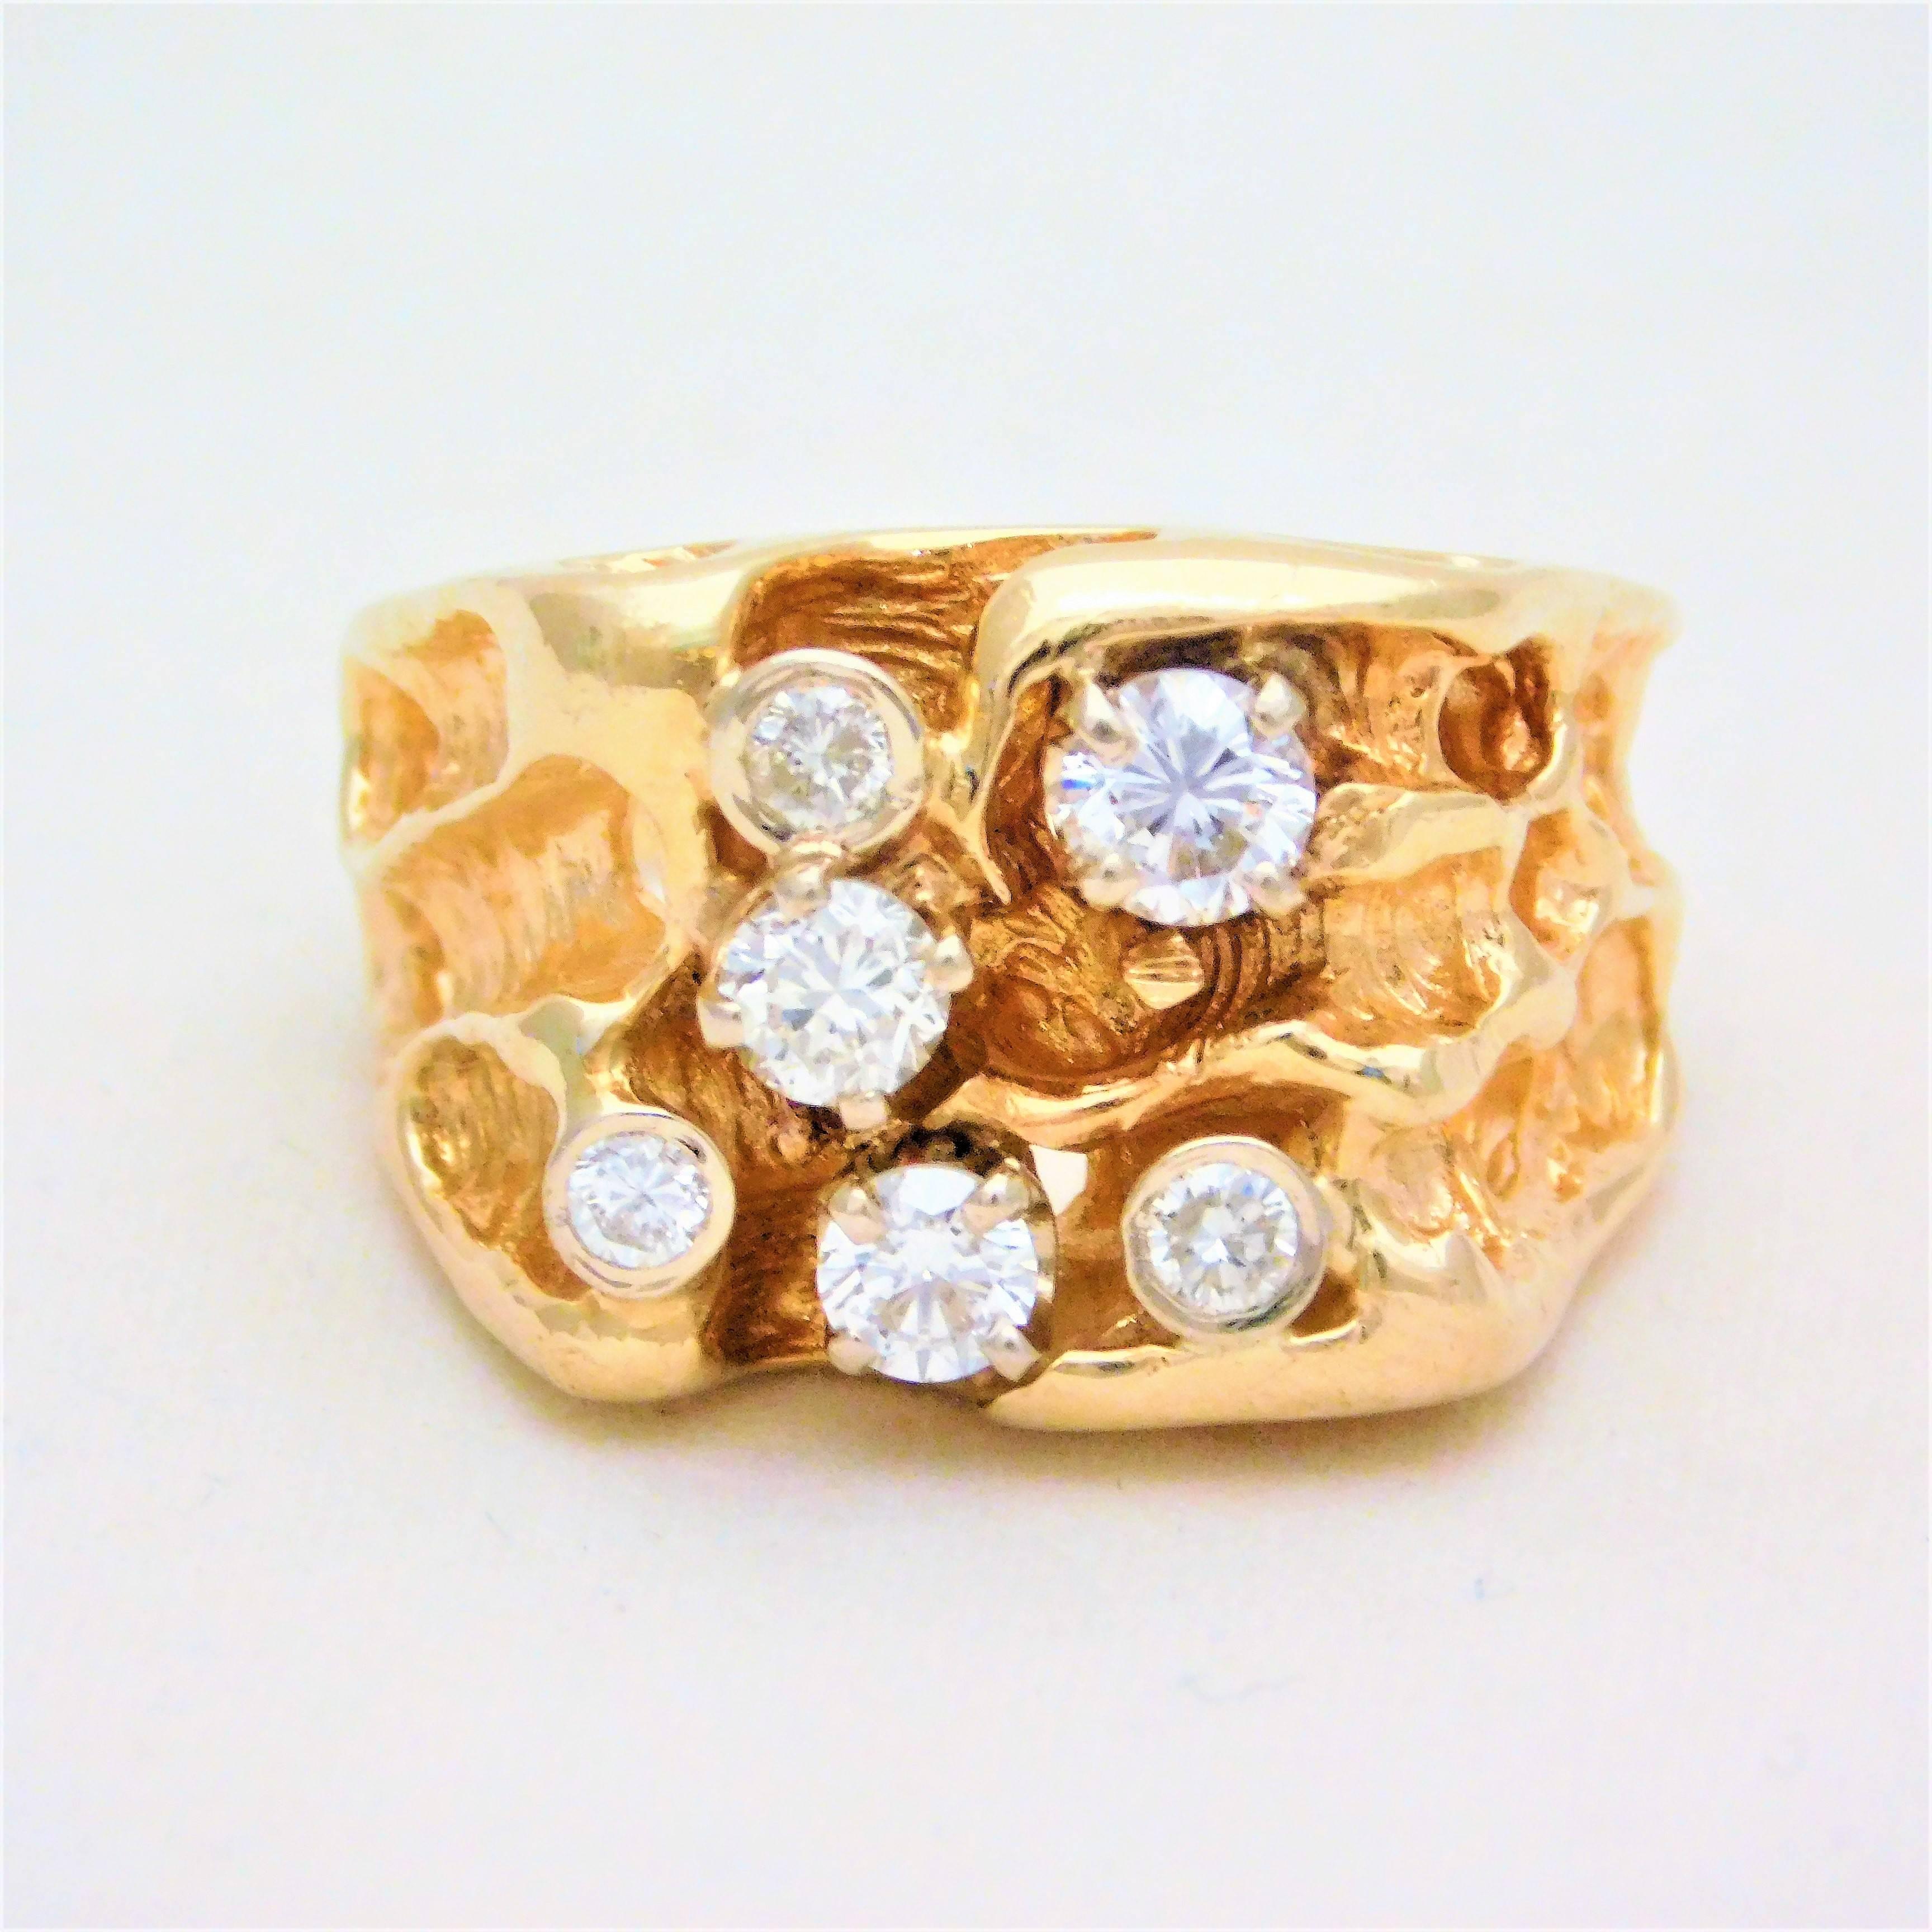 Gents 14 Karat Yellow Gold Ring with Diamonds In Excellent Condition For Sale In Metairie, LA